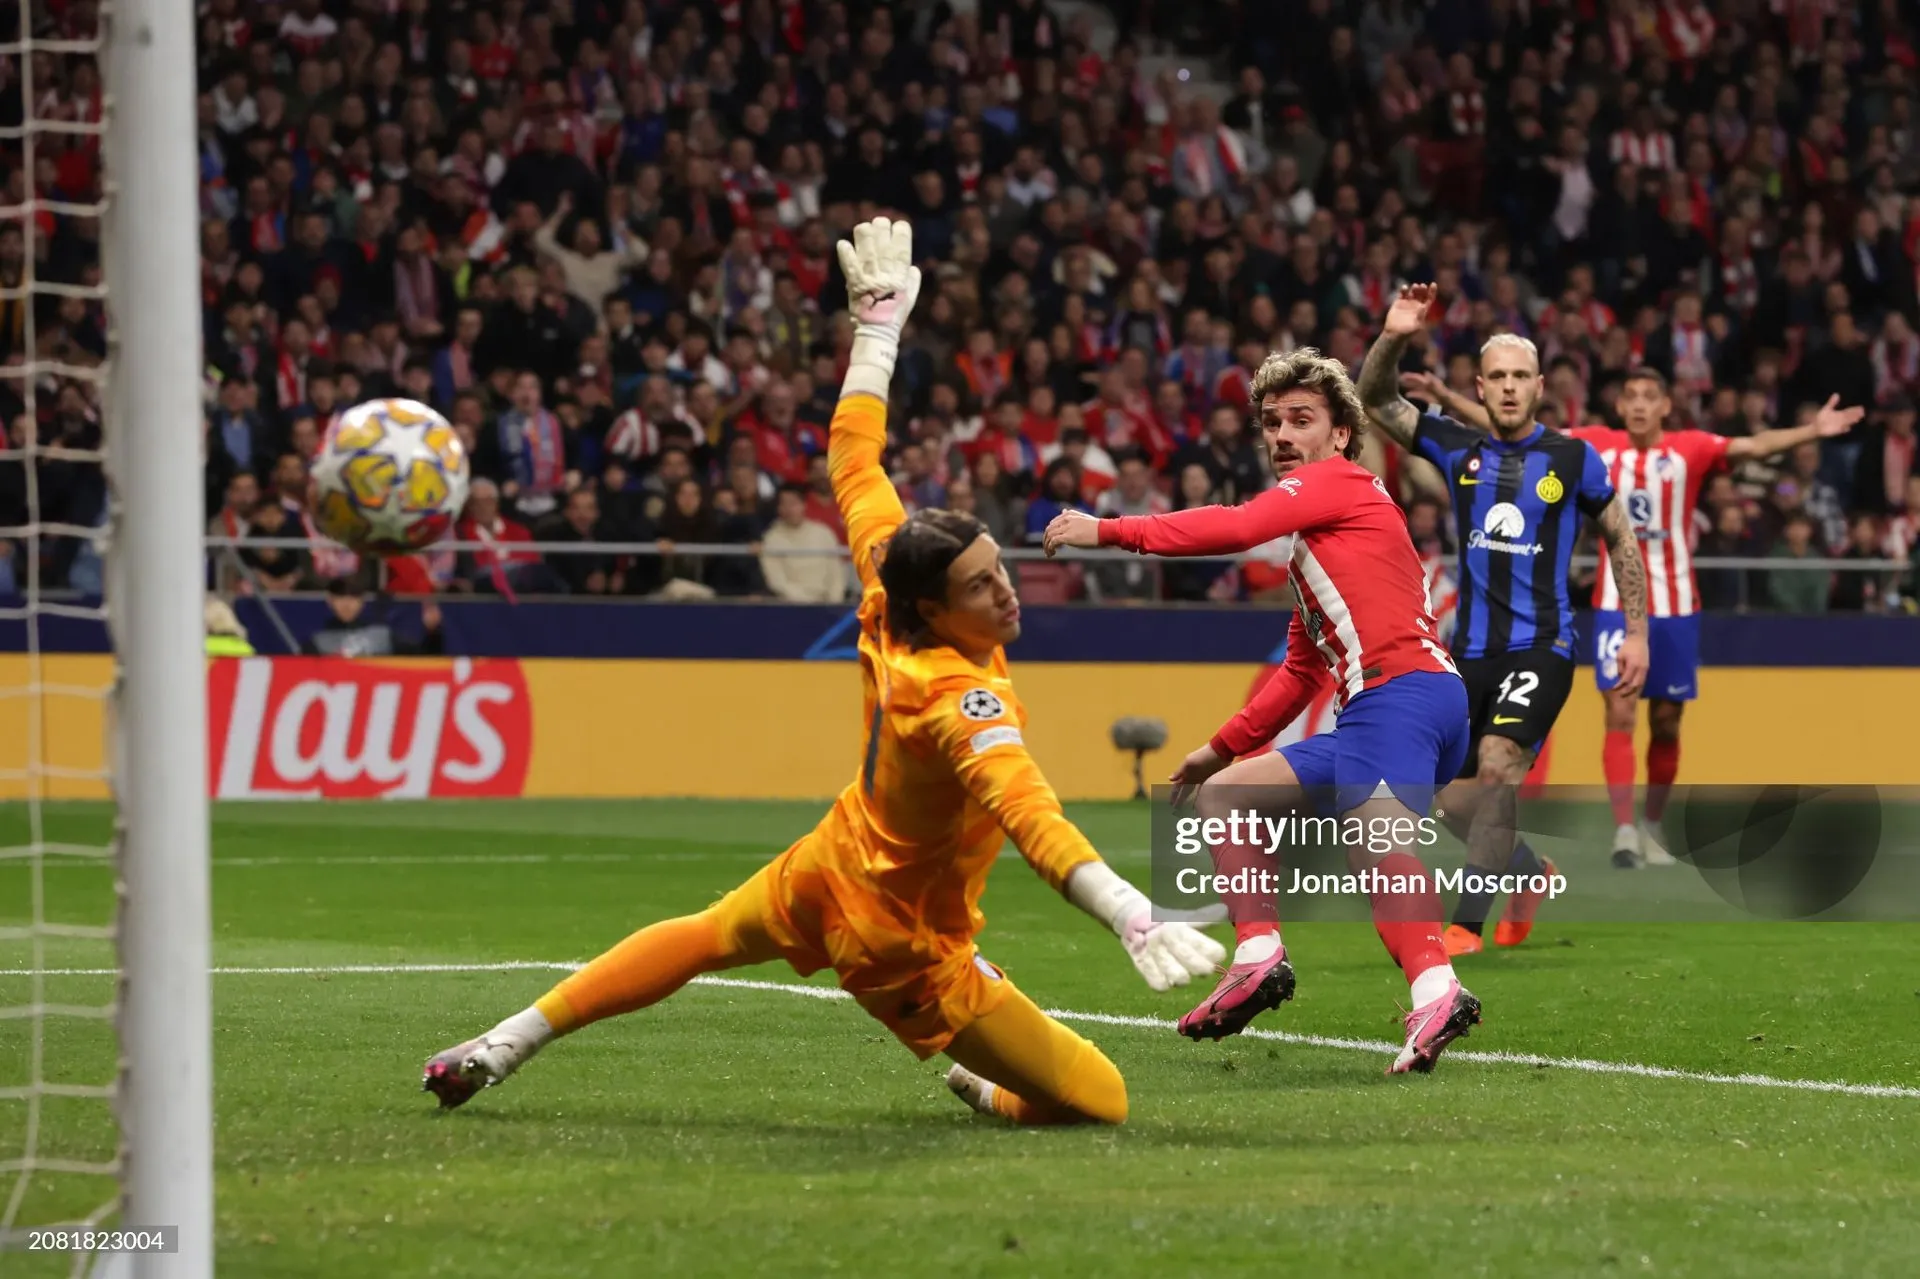 Antonie Griezmann's goal against Inter Milan in UEFA Champions League round of 16 second leg.  Image | Getty